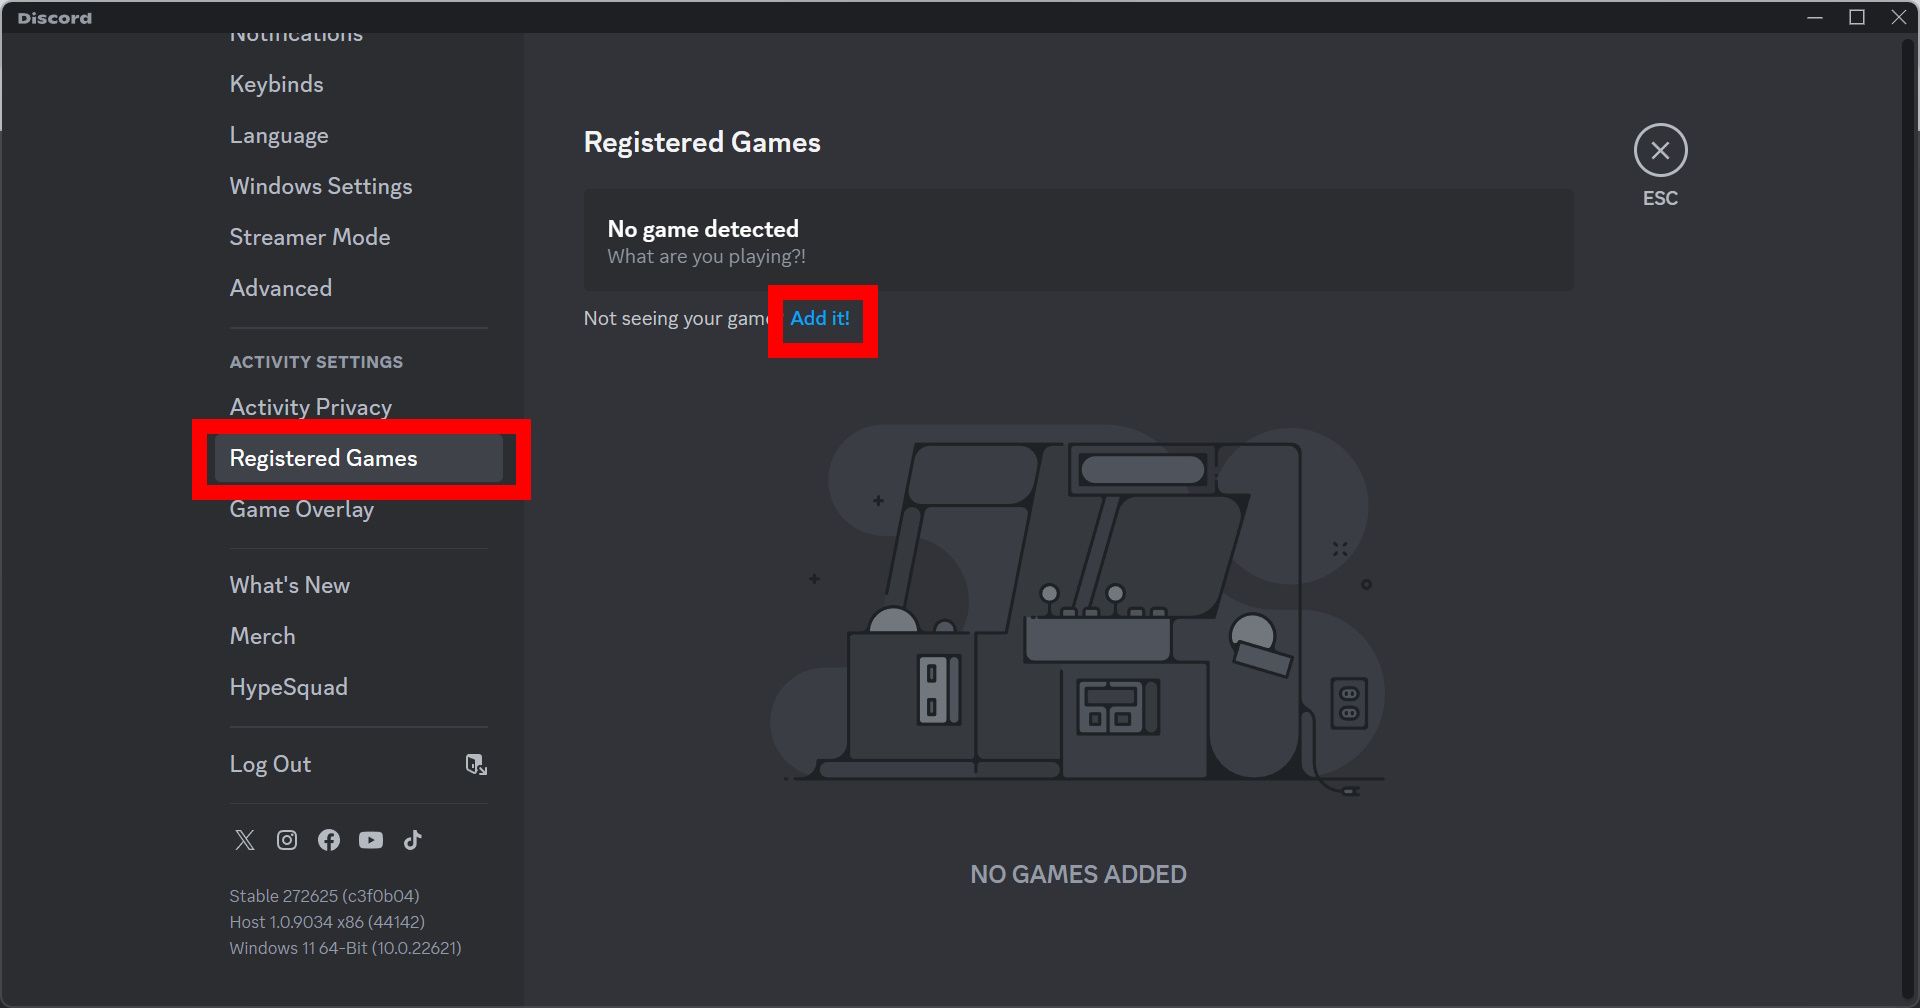 registered games section in discord desktop app with add it button